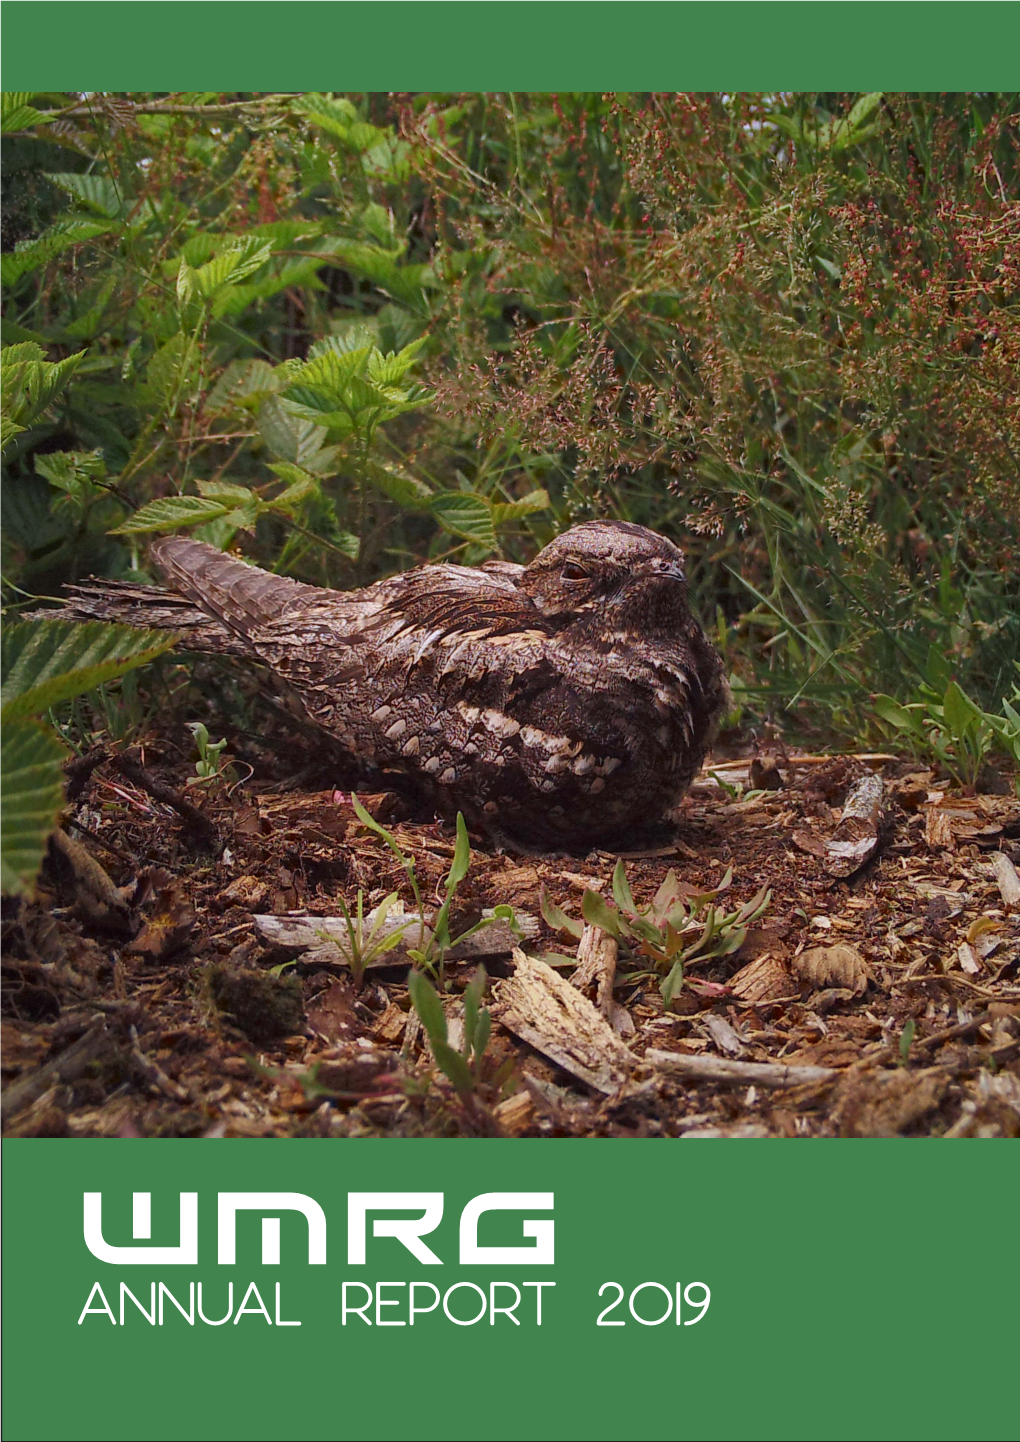 WMRG ANNUAL REPORT 2019 WMRG the West Midlands Ringing Group 2019 Annual Report Would Not Be Possible Without the Support of the Following Partners